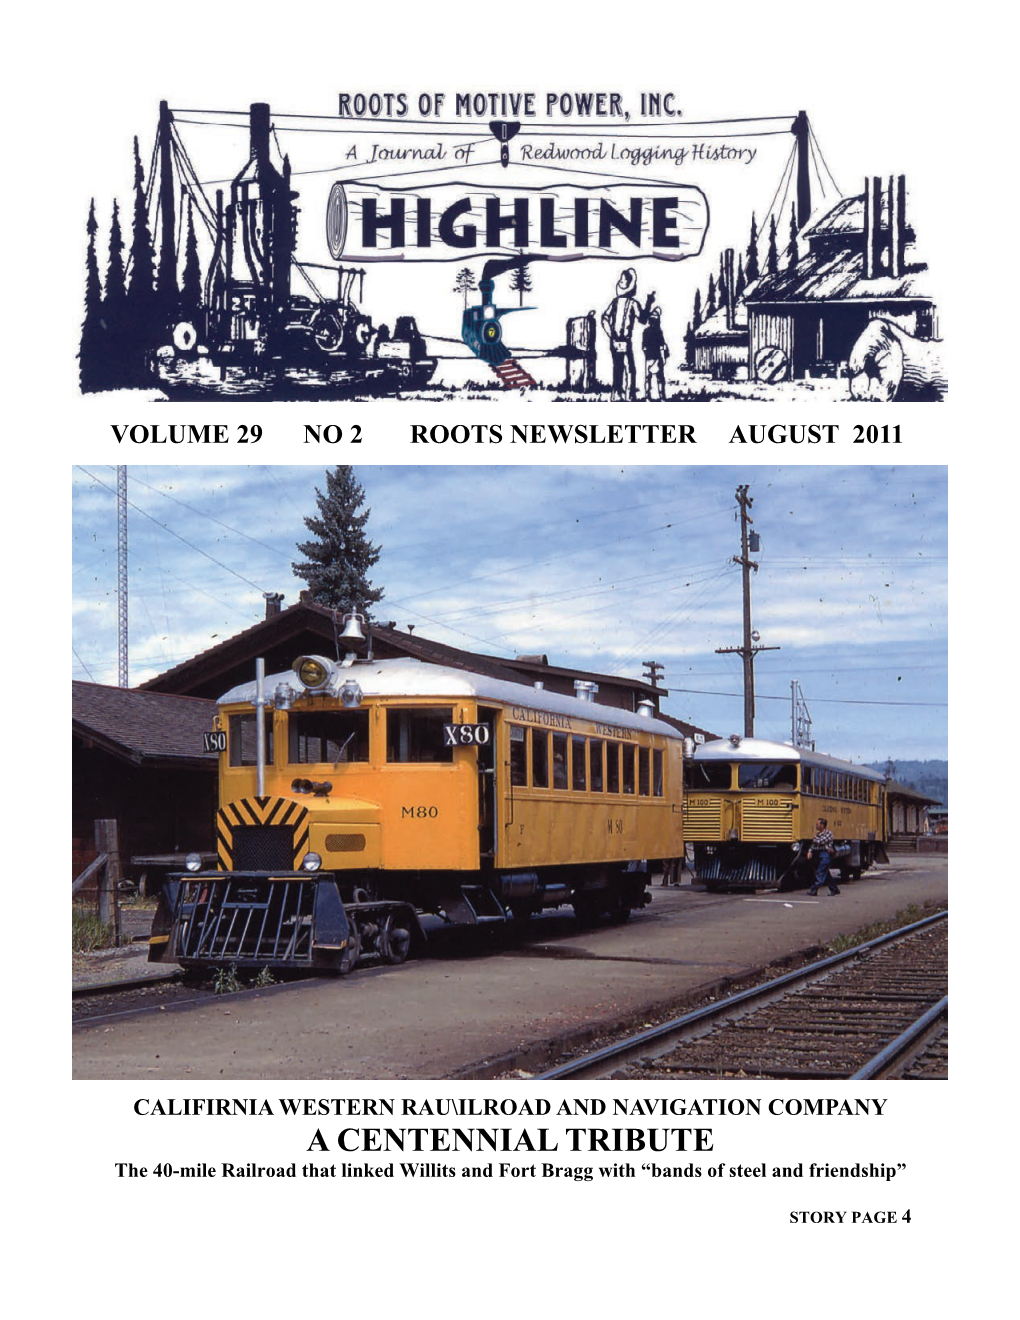 A Centennial Tribute to the 40-Mile Railroad That Linked Willits and Ft